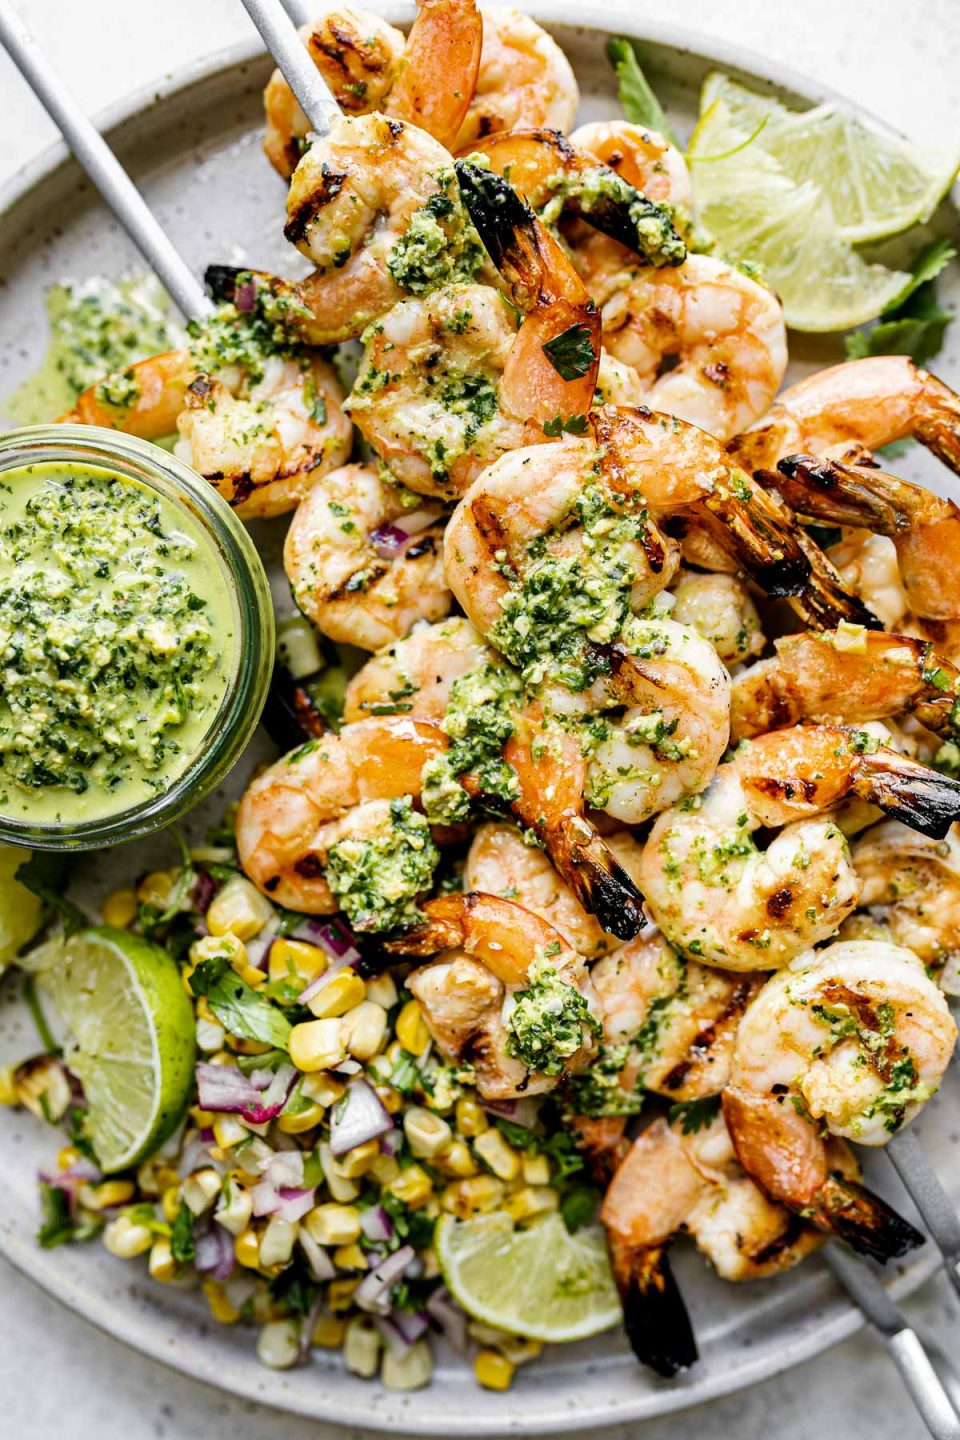 A close up of four zesty grilled shrimp skewers with jalapeño pesto & grilled corn salsa stacked on top of a gray speckled ceramic plate & garnished with lime wedges. A small jar of jalapeño pesto also sits on the plate ready for dipping or drizzling. The plate sits atop a light gray & white surface.